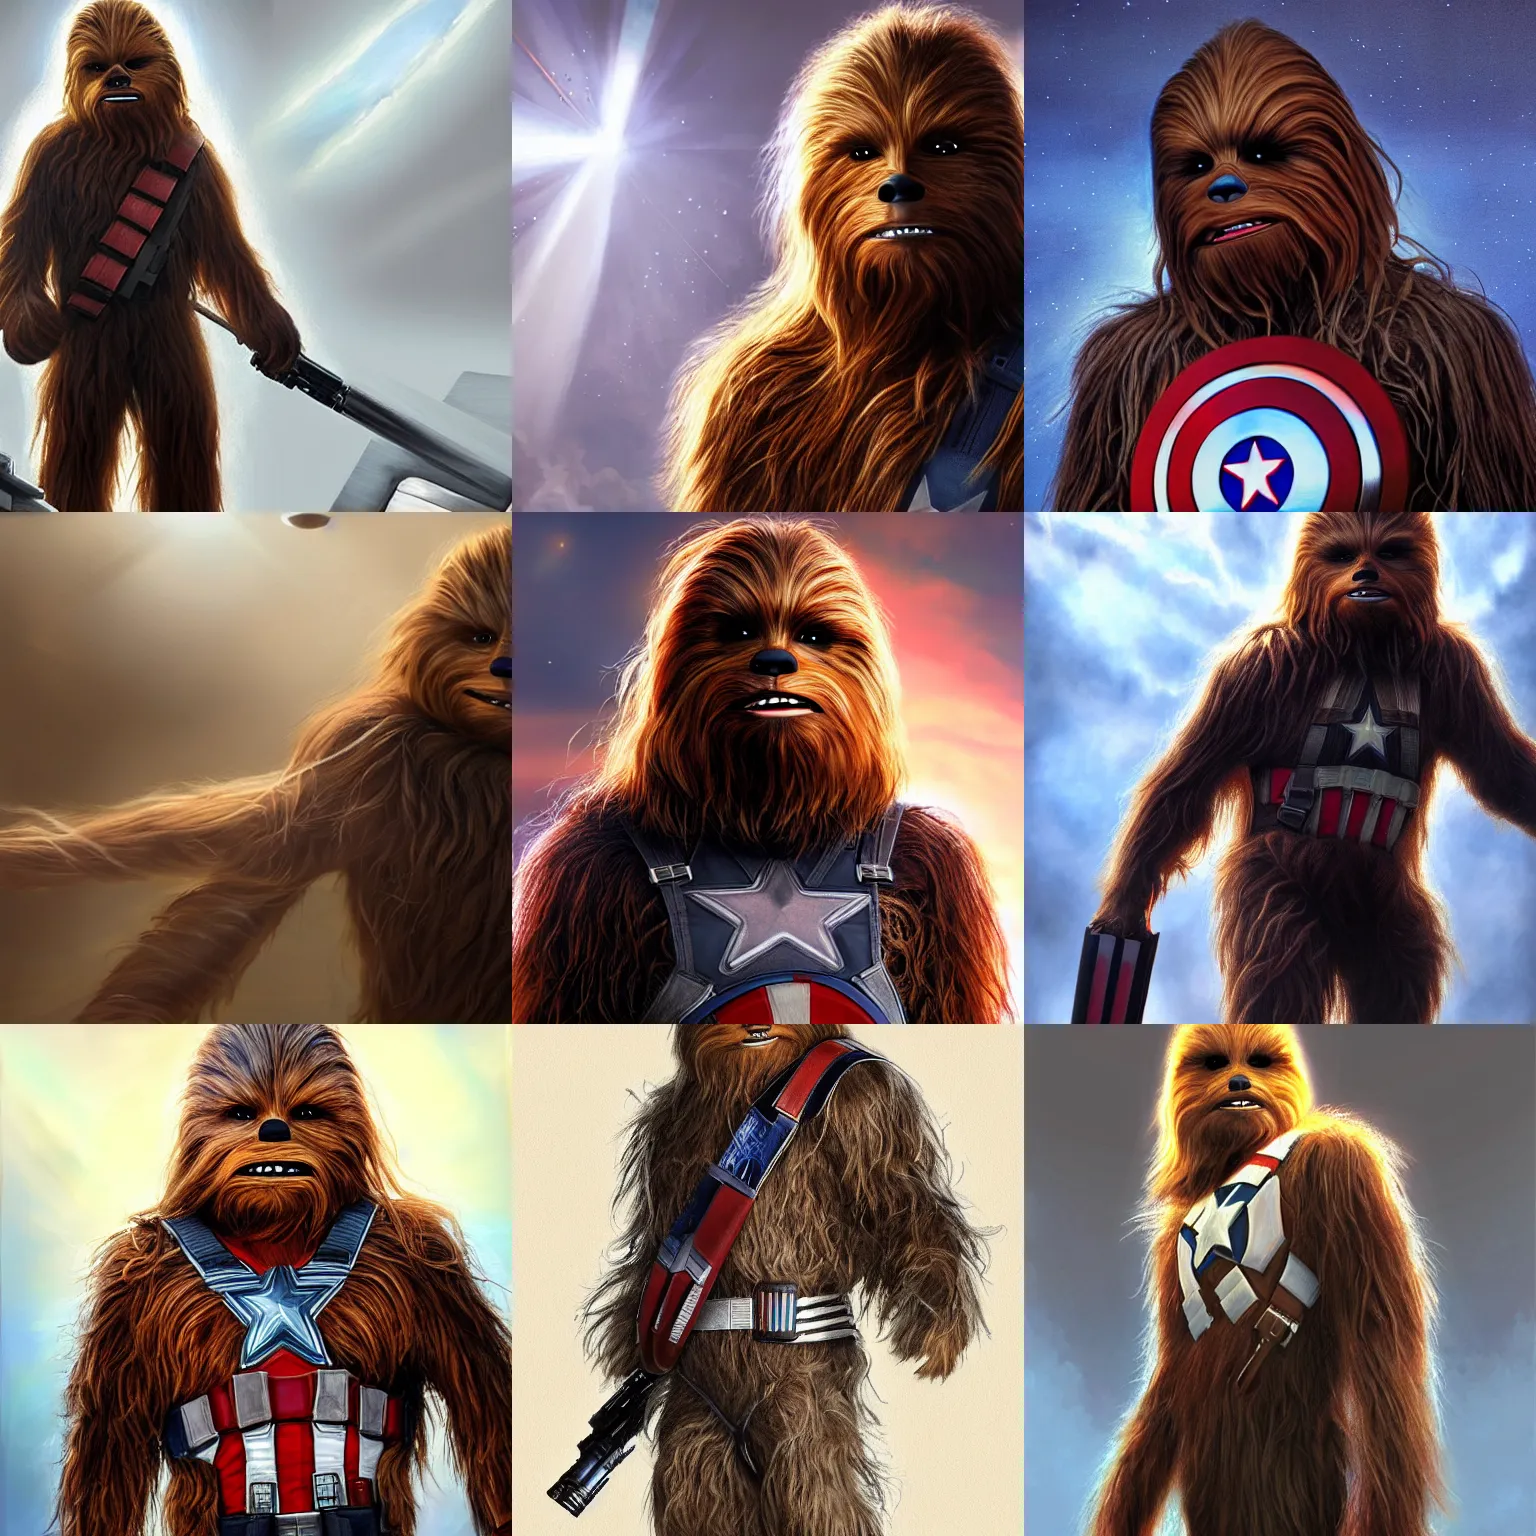 Prompt: photorealistic art of chewbacca as captain america, dynamic lighting, space atmosphere, hyperrealism, stunning visuals